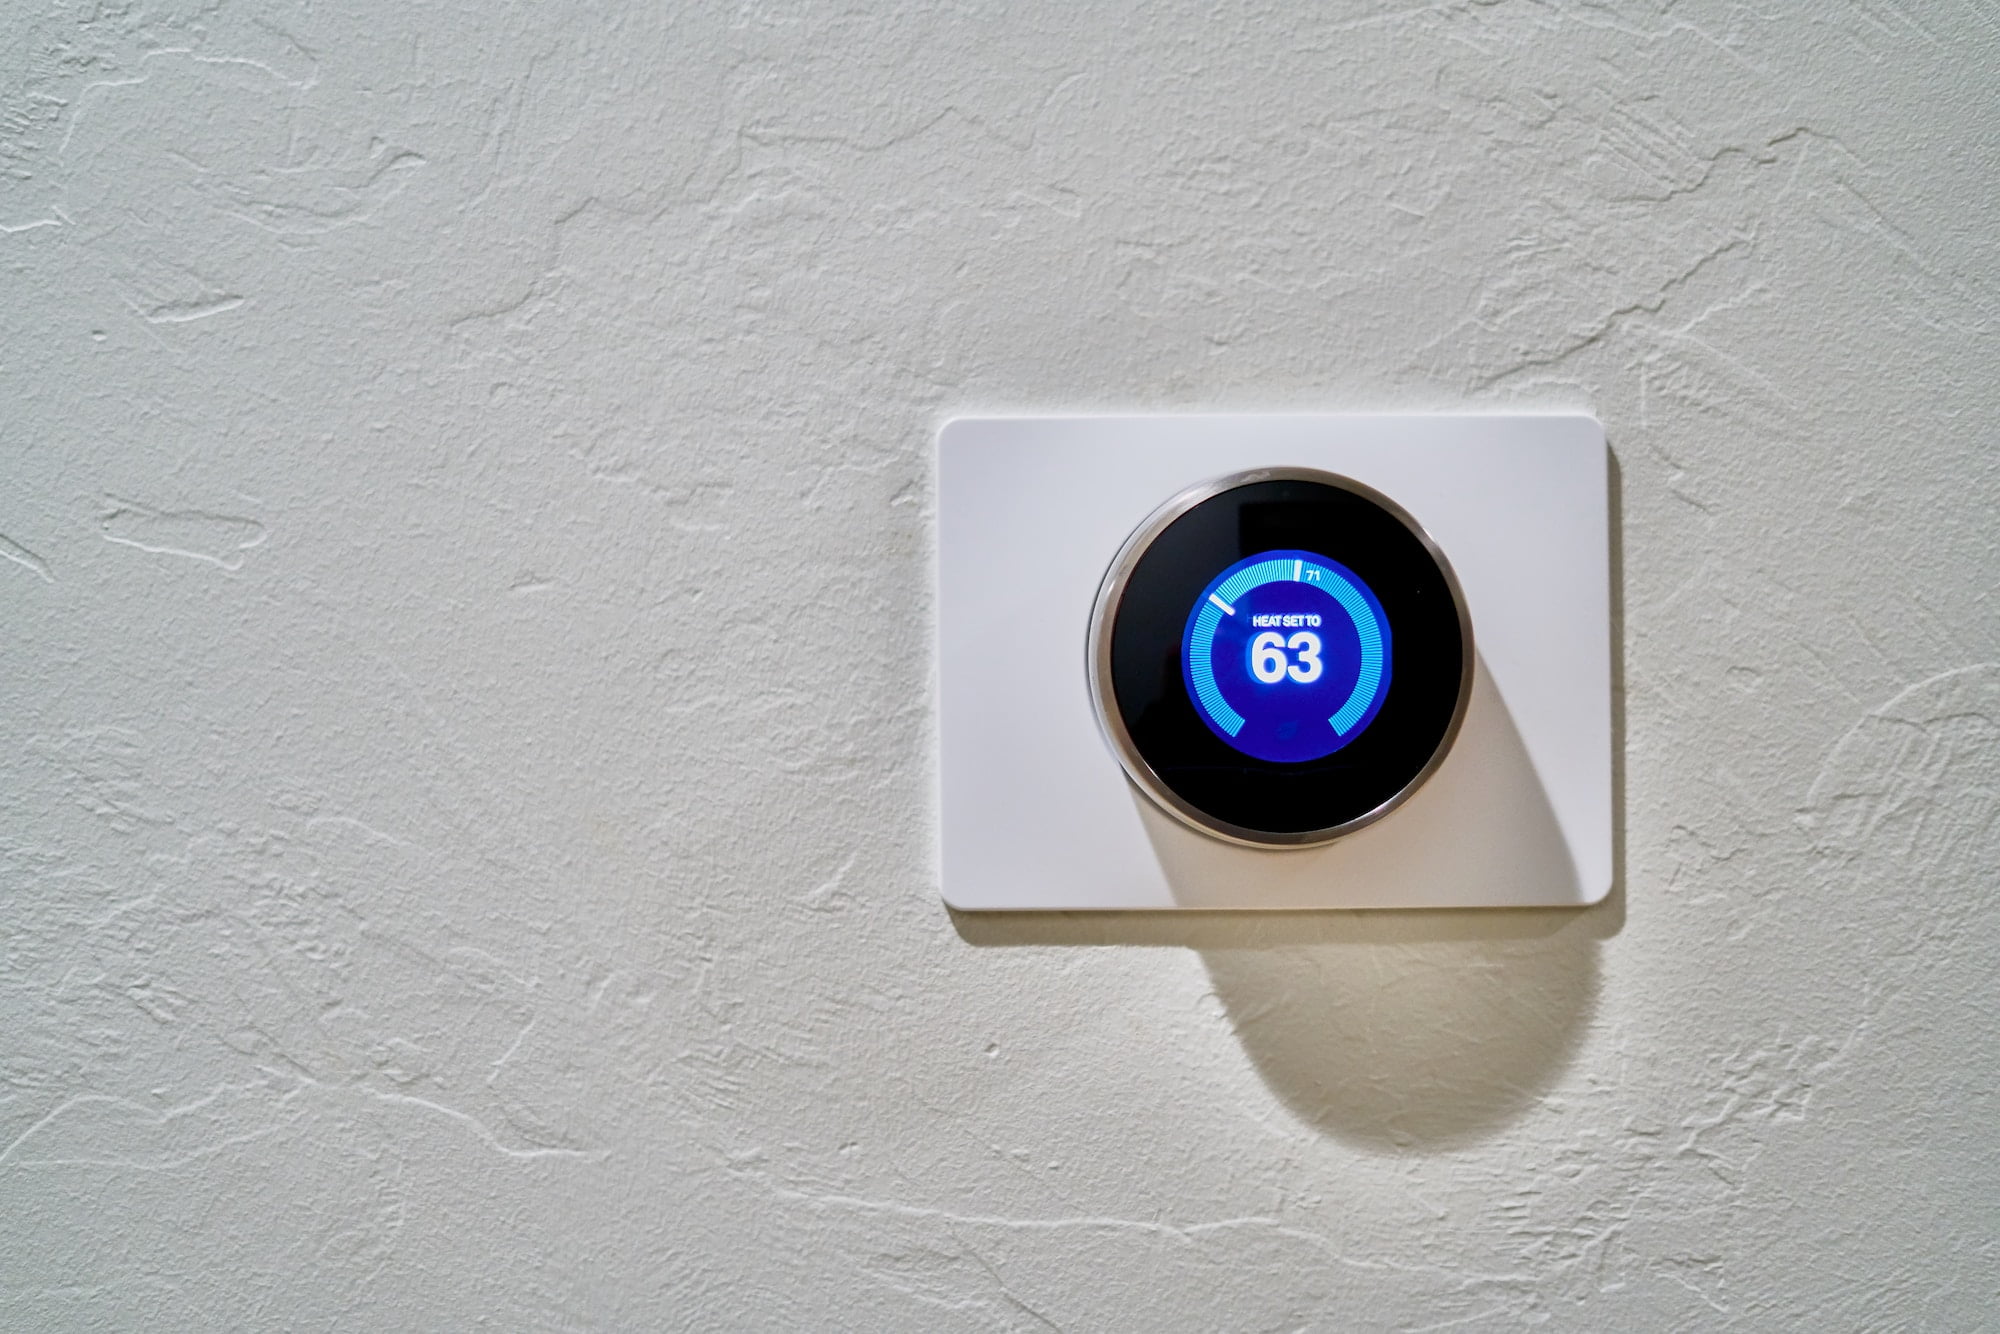 home energy saving tips - smart thermostat